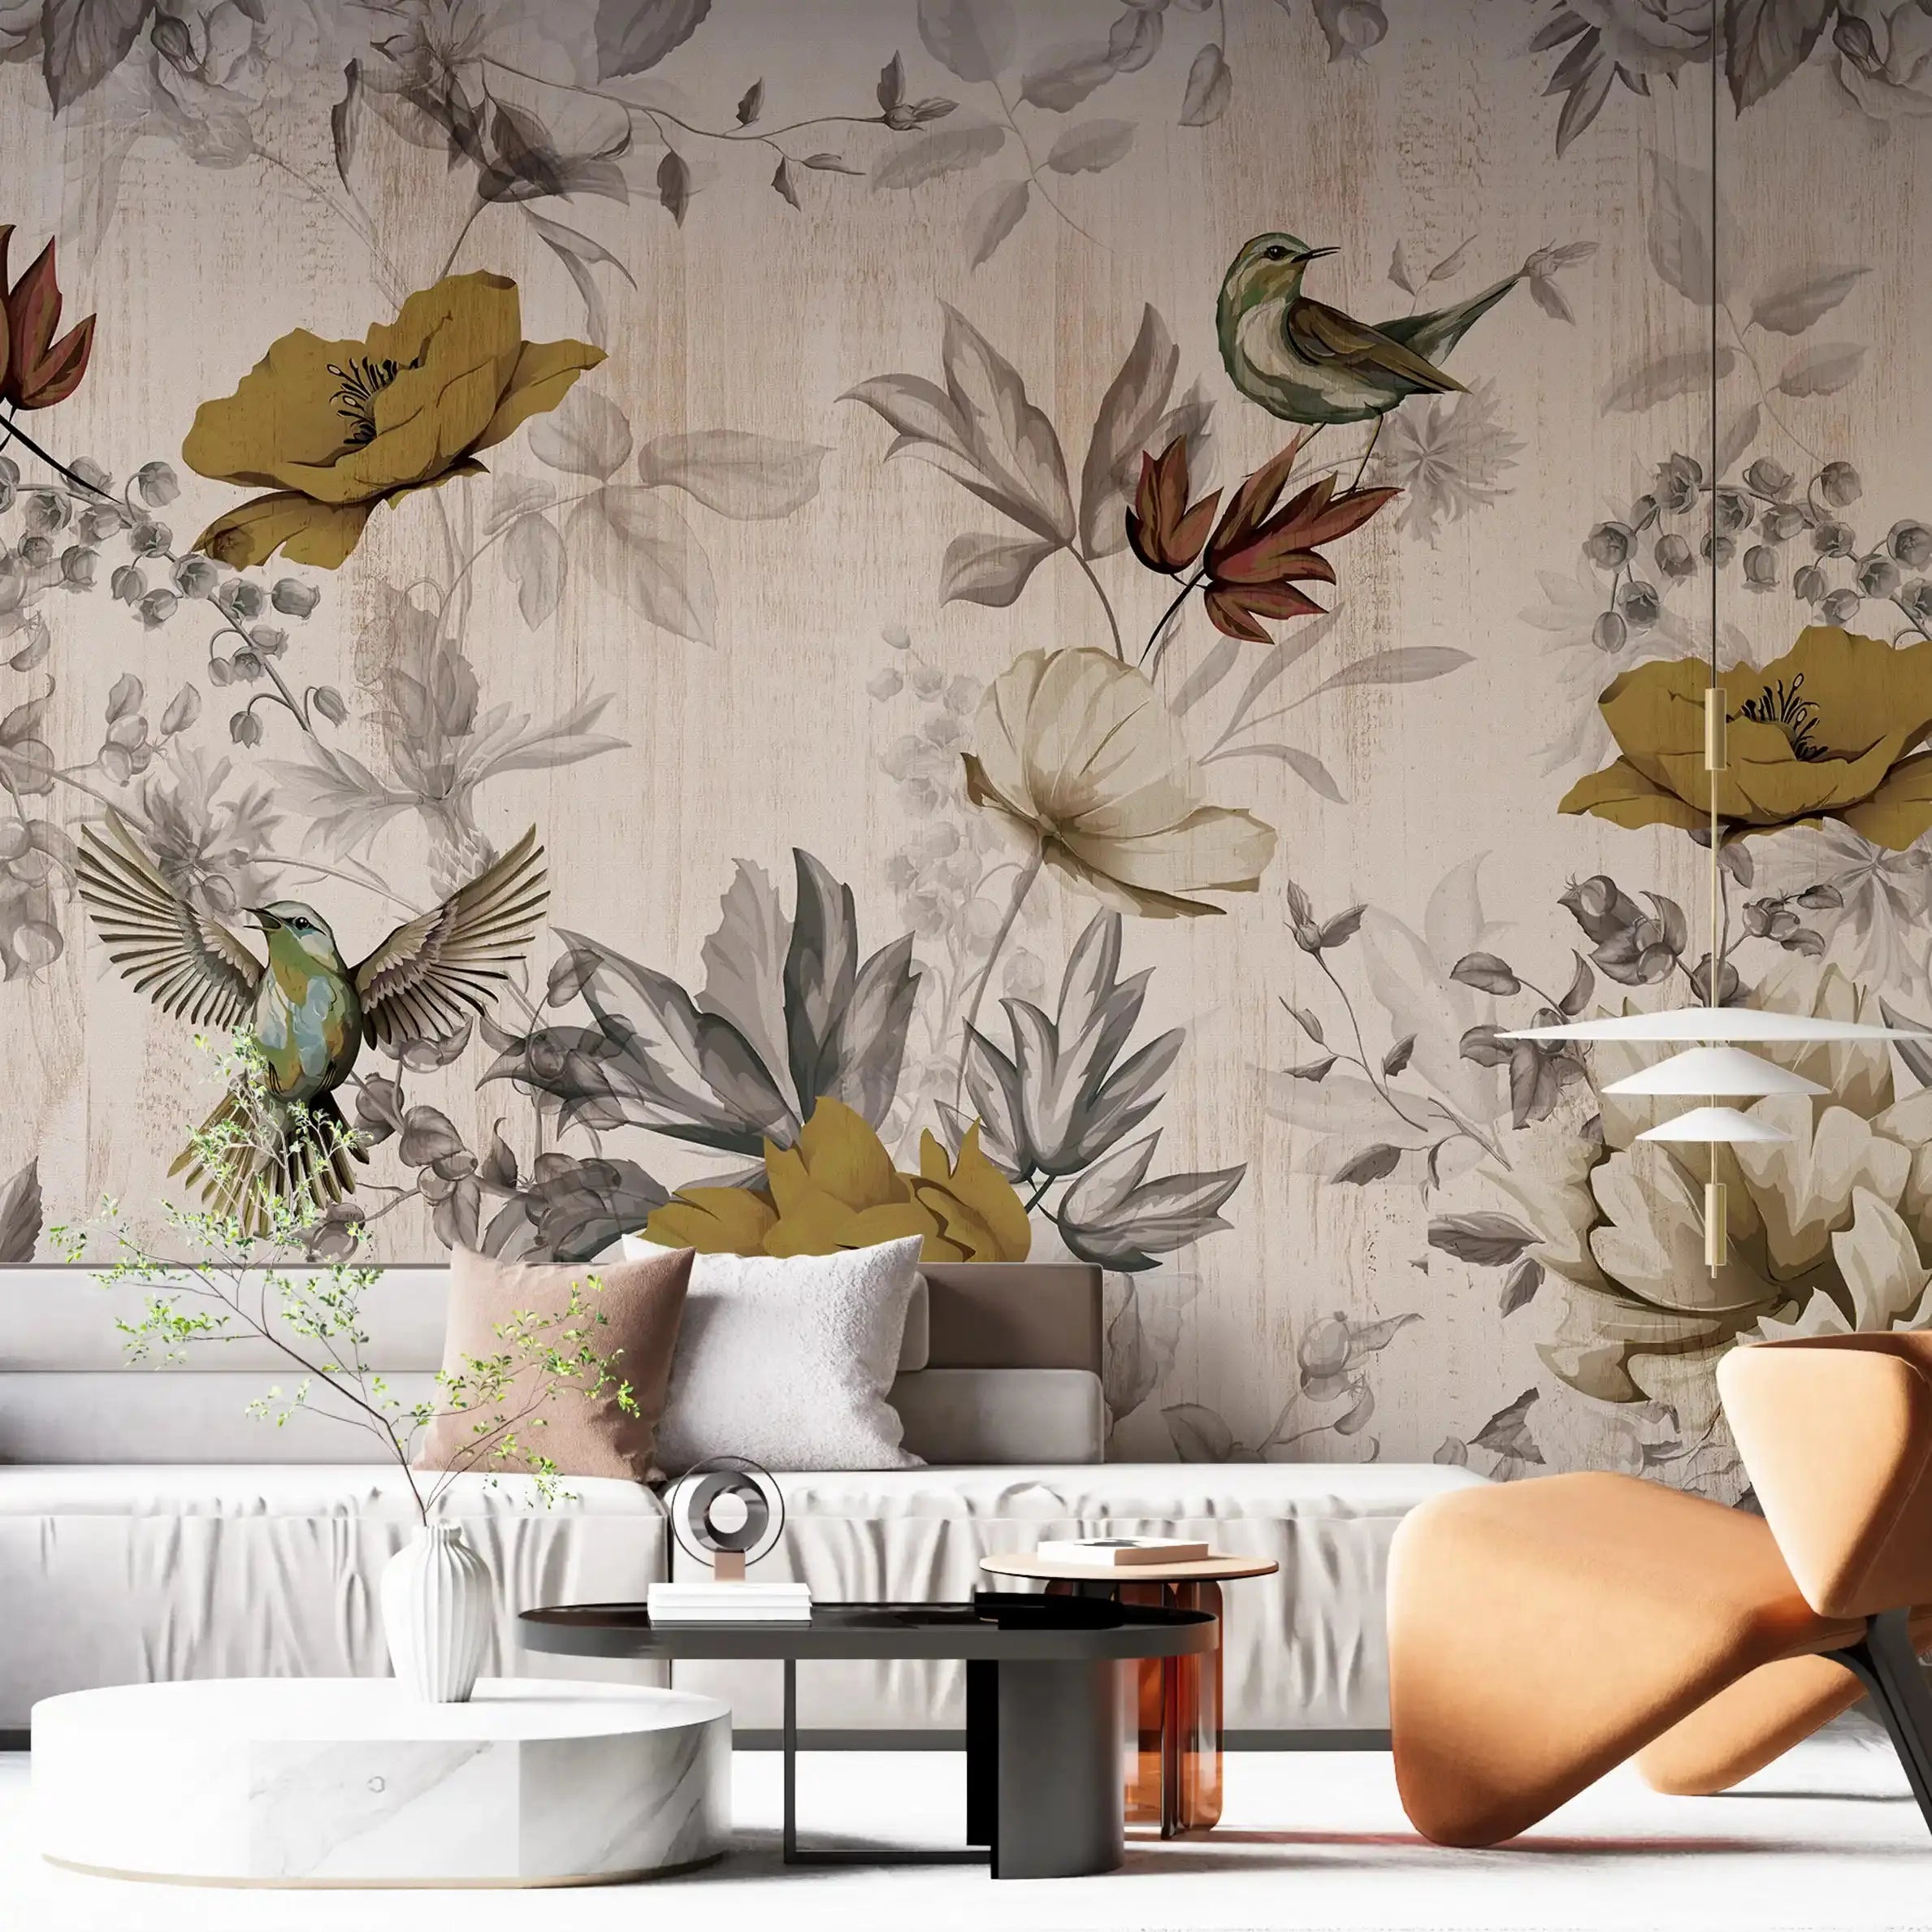 3041-D / Removable Tropical Leaf Wallpaper: Peel and Stick Vintage Red Floral Mural with Birds, Ideal for Nursery, Kitchen & Bathroom - Artevella